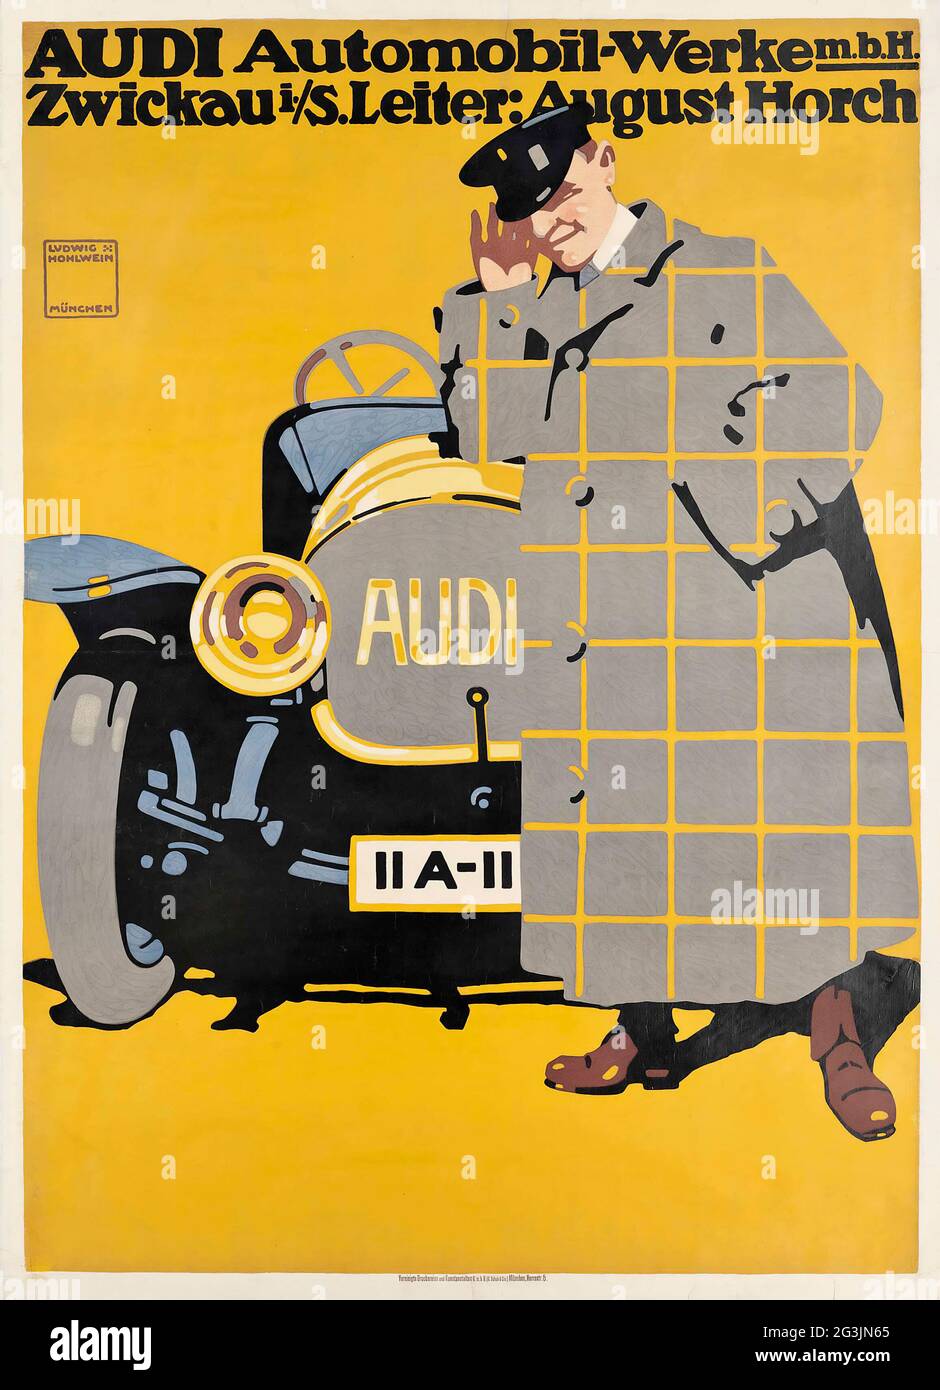 Vintage car poster - Ludwig Hohlwein (1874-1949) Audi Automobil Werke, Audi poster, old style 1910 Stock Photo